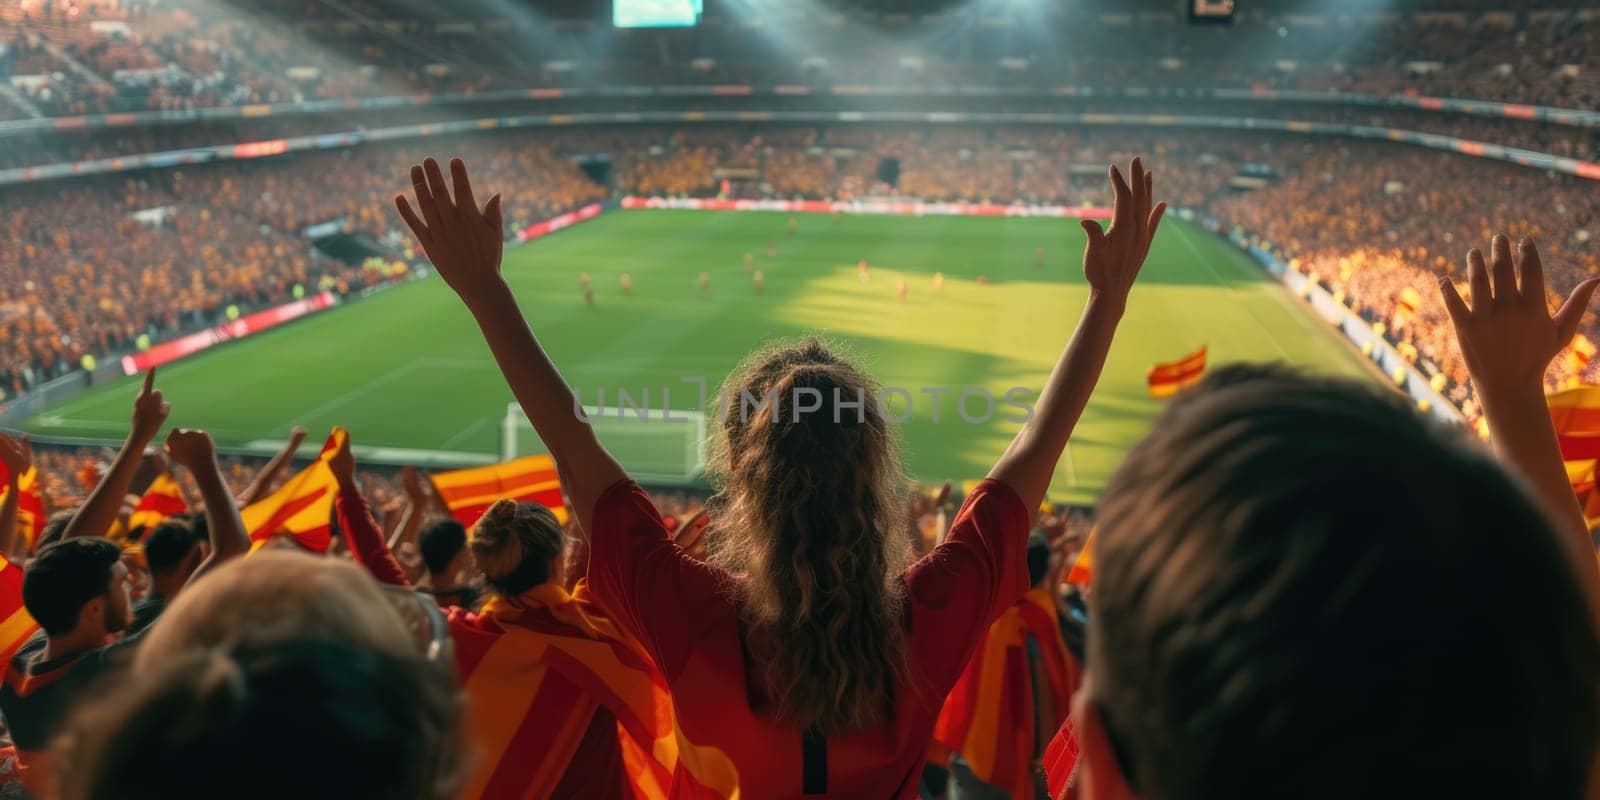 Soccer fan's arm gesture in a stadium for a sport event AIG41 by biancoblue